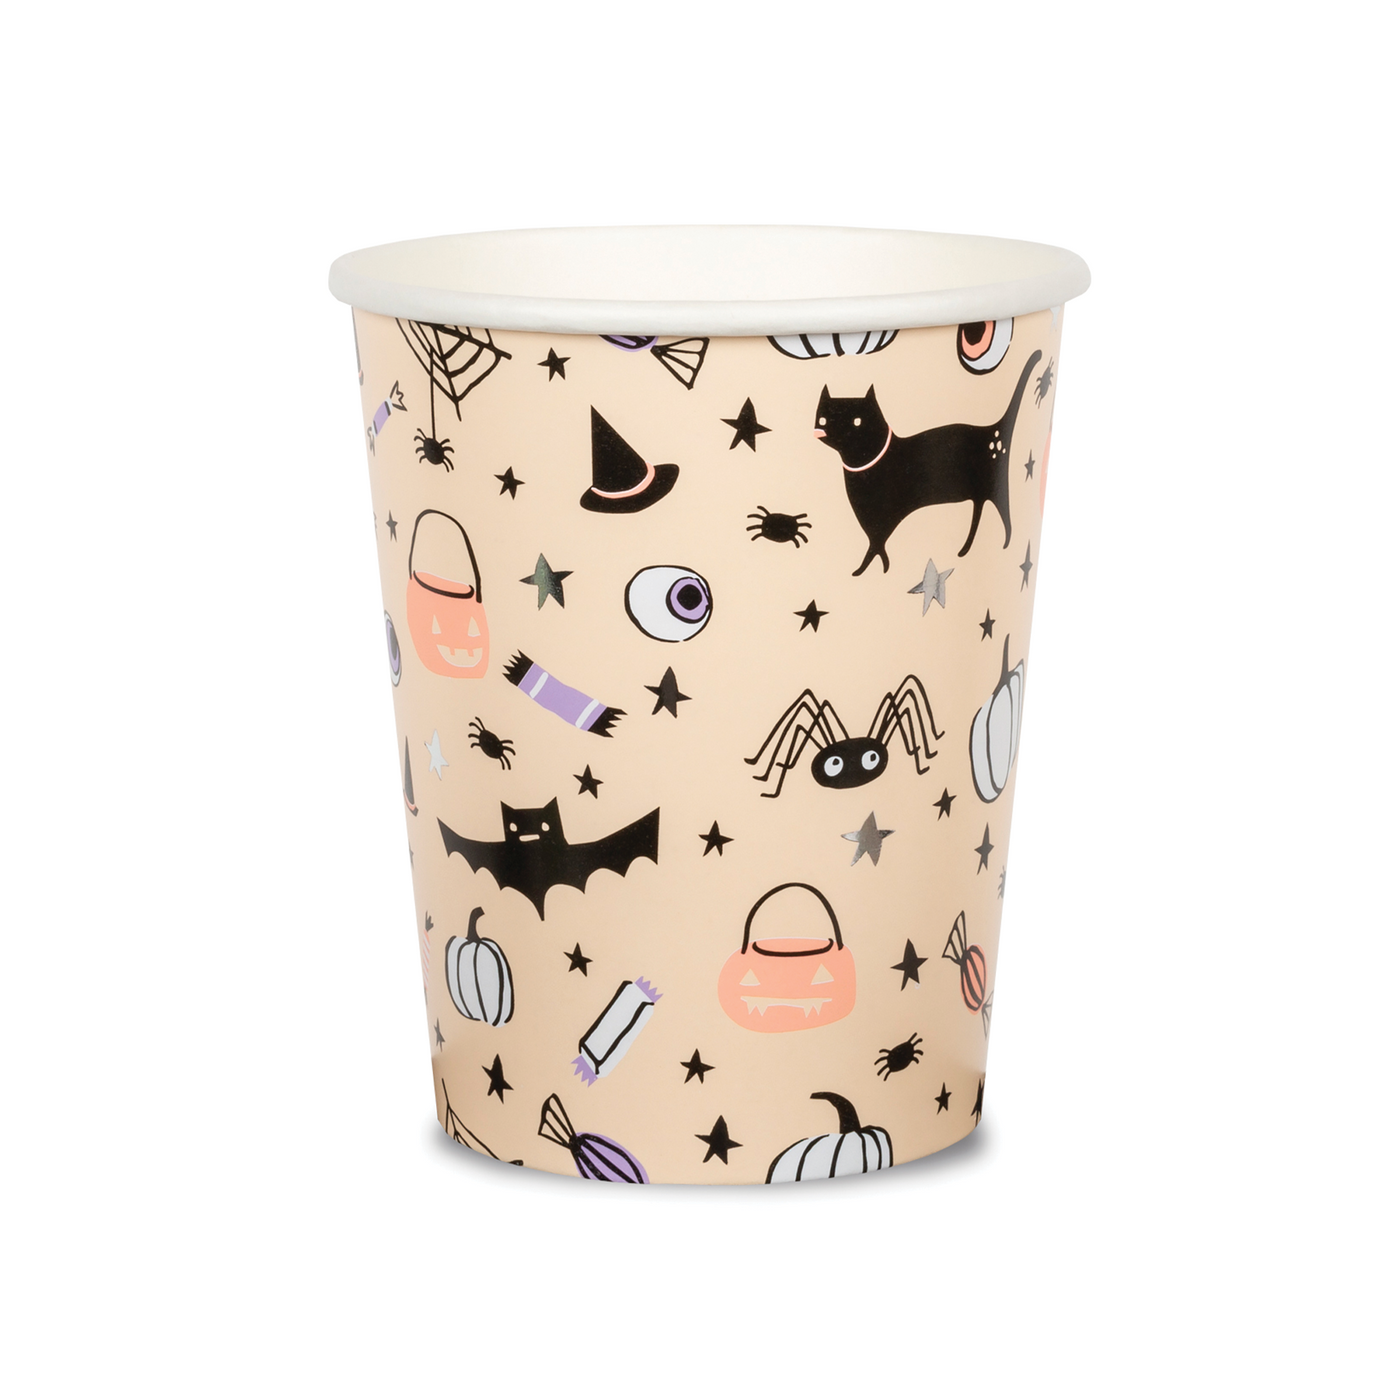 Hocus Pocus Halloween Cup with cute spooky Halloween themed graphics of black cats, bats, Jack-o-lanterns and candy.